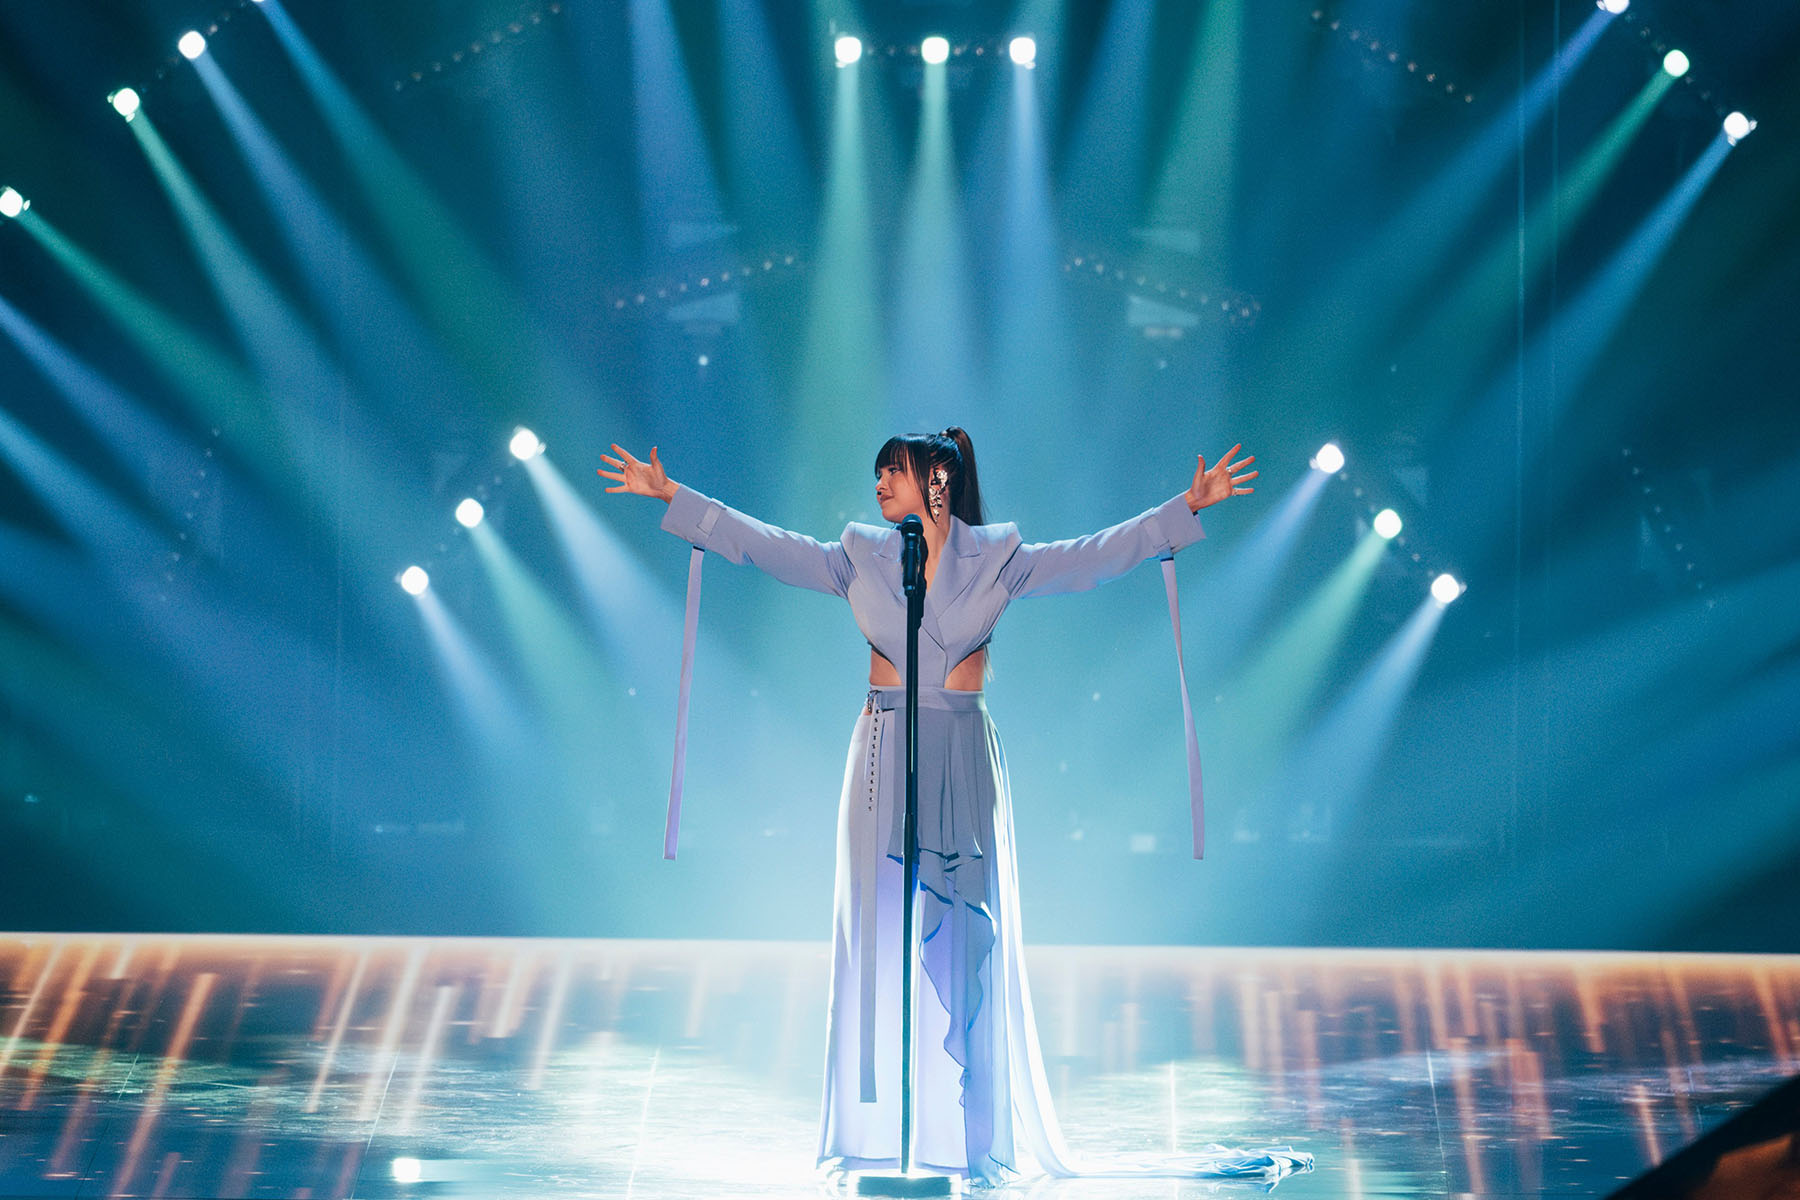 Over 600 Robe Moving Lights help Dazzle at 2023 Eurovision Sing Contest6